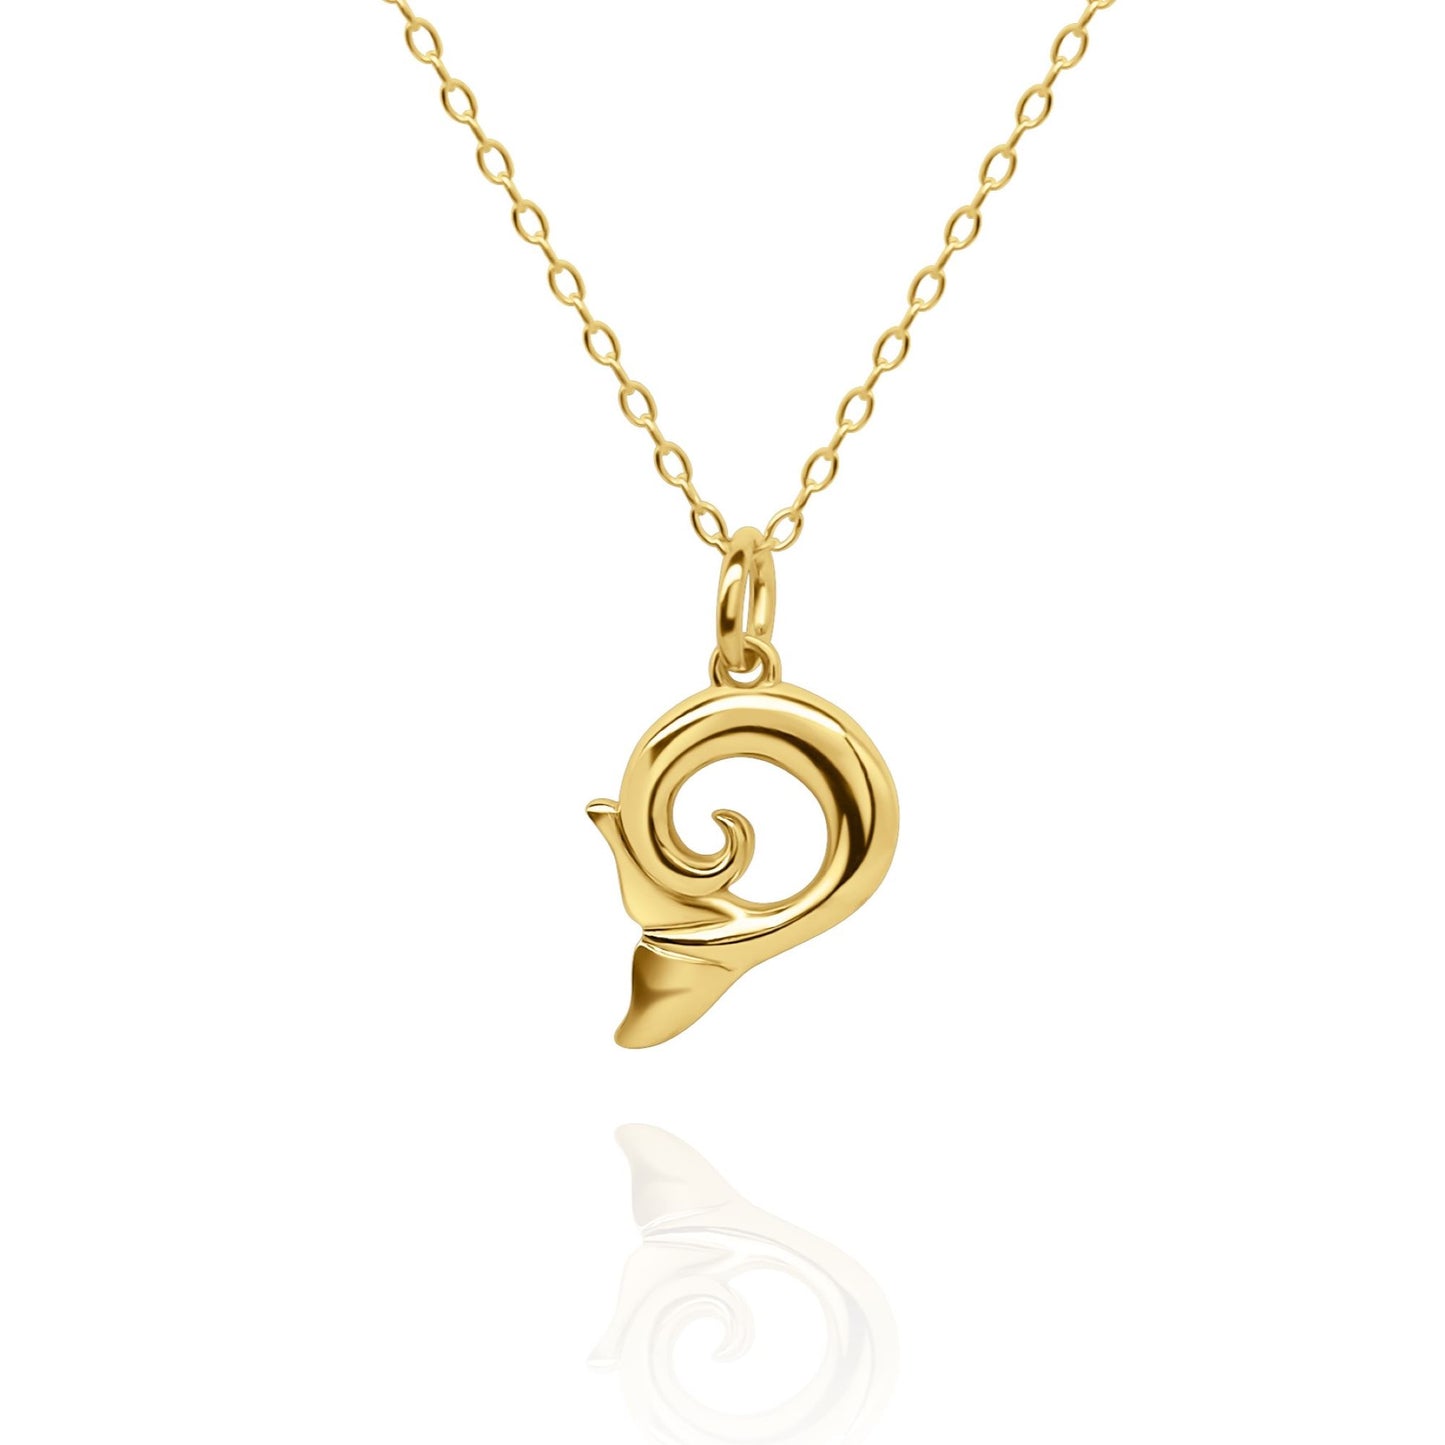 Gold vermeil Whale Tail charm pendant and chain. © Adrian Ashley